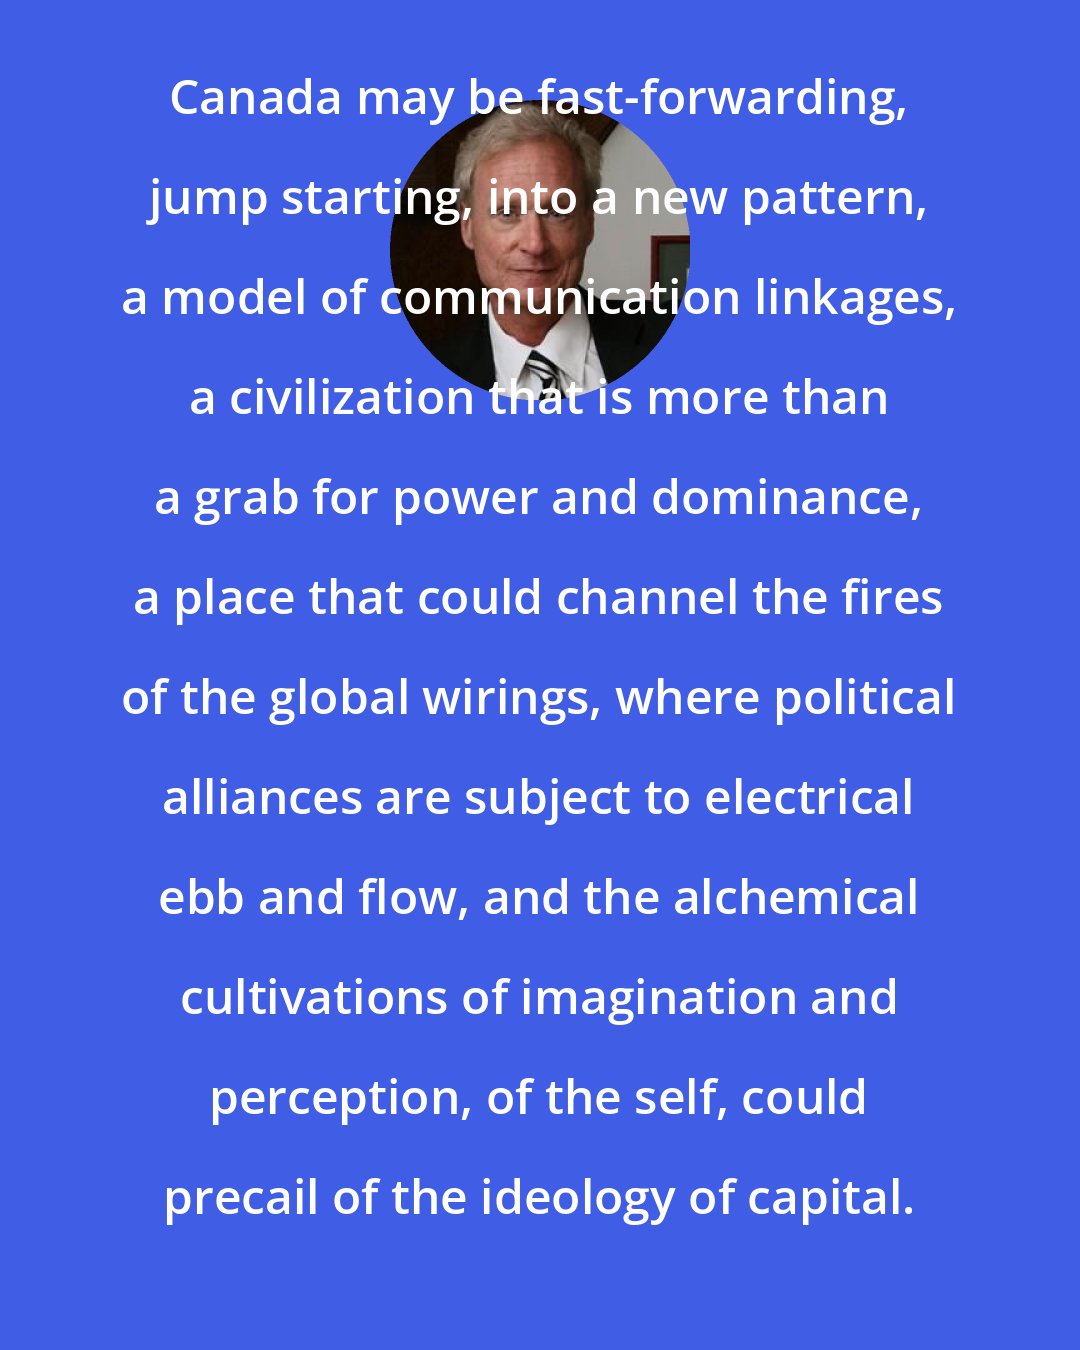 B. W. Powe: Canada may be fast-forwarding, jump starting, into a new pattern, a model of communication linkages, a civilization that is more than a grab for power and dominance, a place that could channel the fires of the global wirings, where political alliances are subject to electrical ebb and flow, and the alchemical cultivations of imagination and perception, of the self, could precail of the ideology of capital.